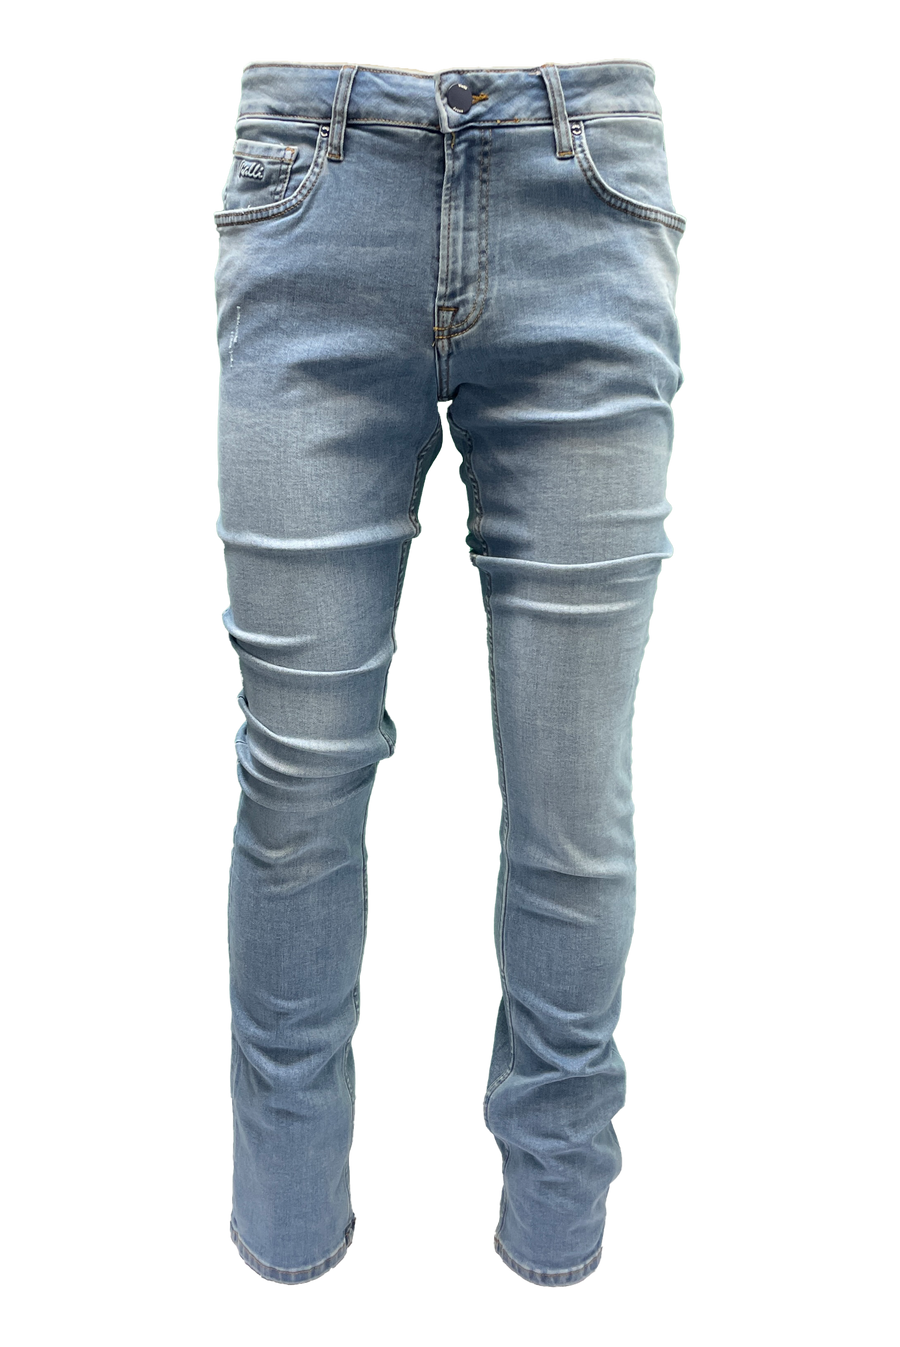 Ziazzo Sottle Slim-Fit Jeans*